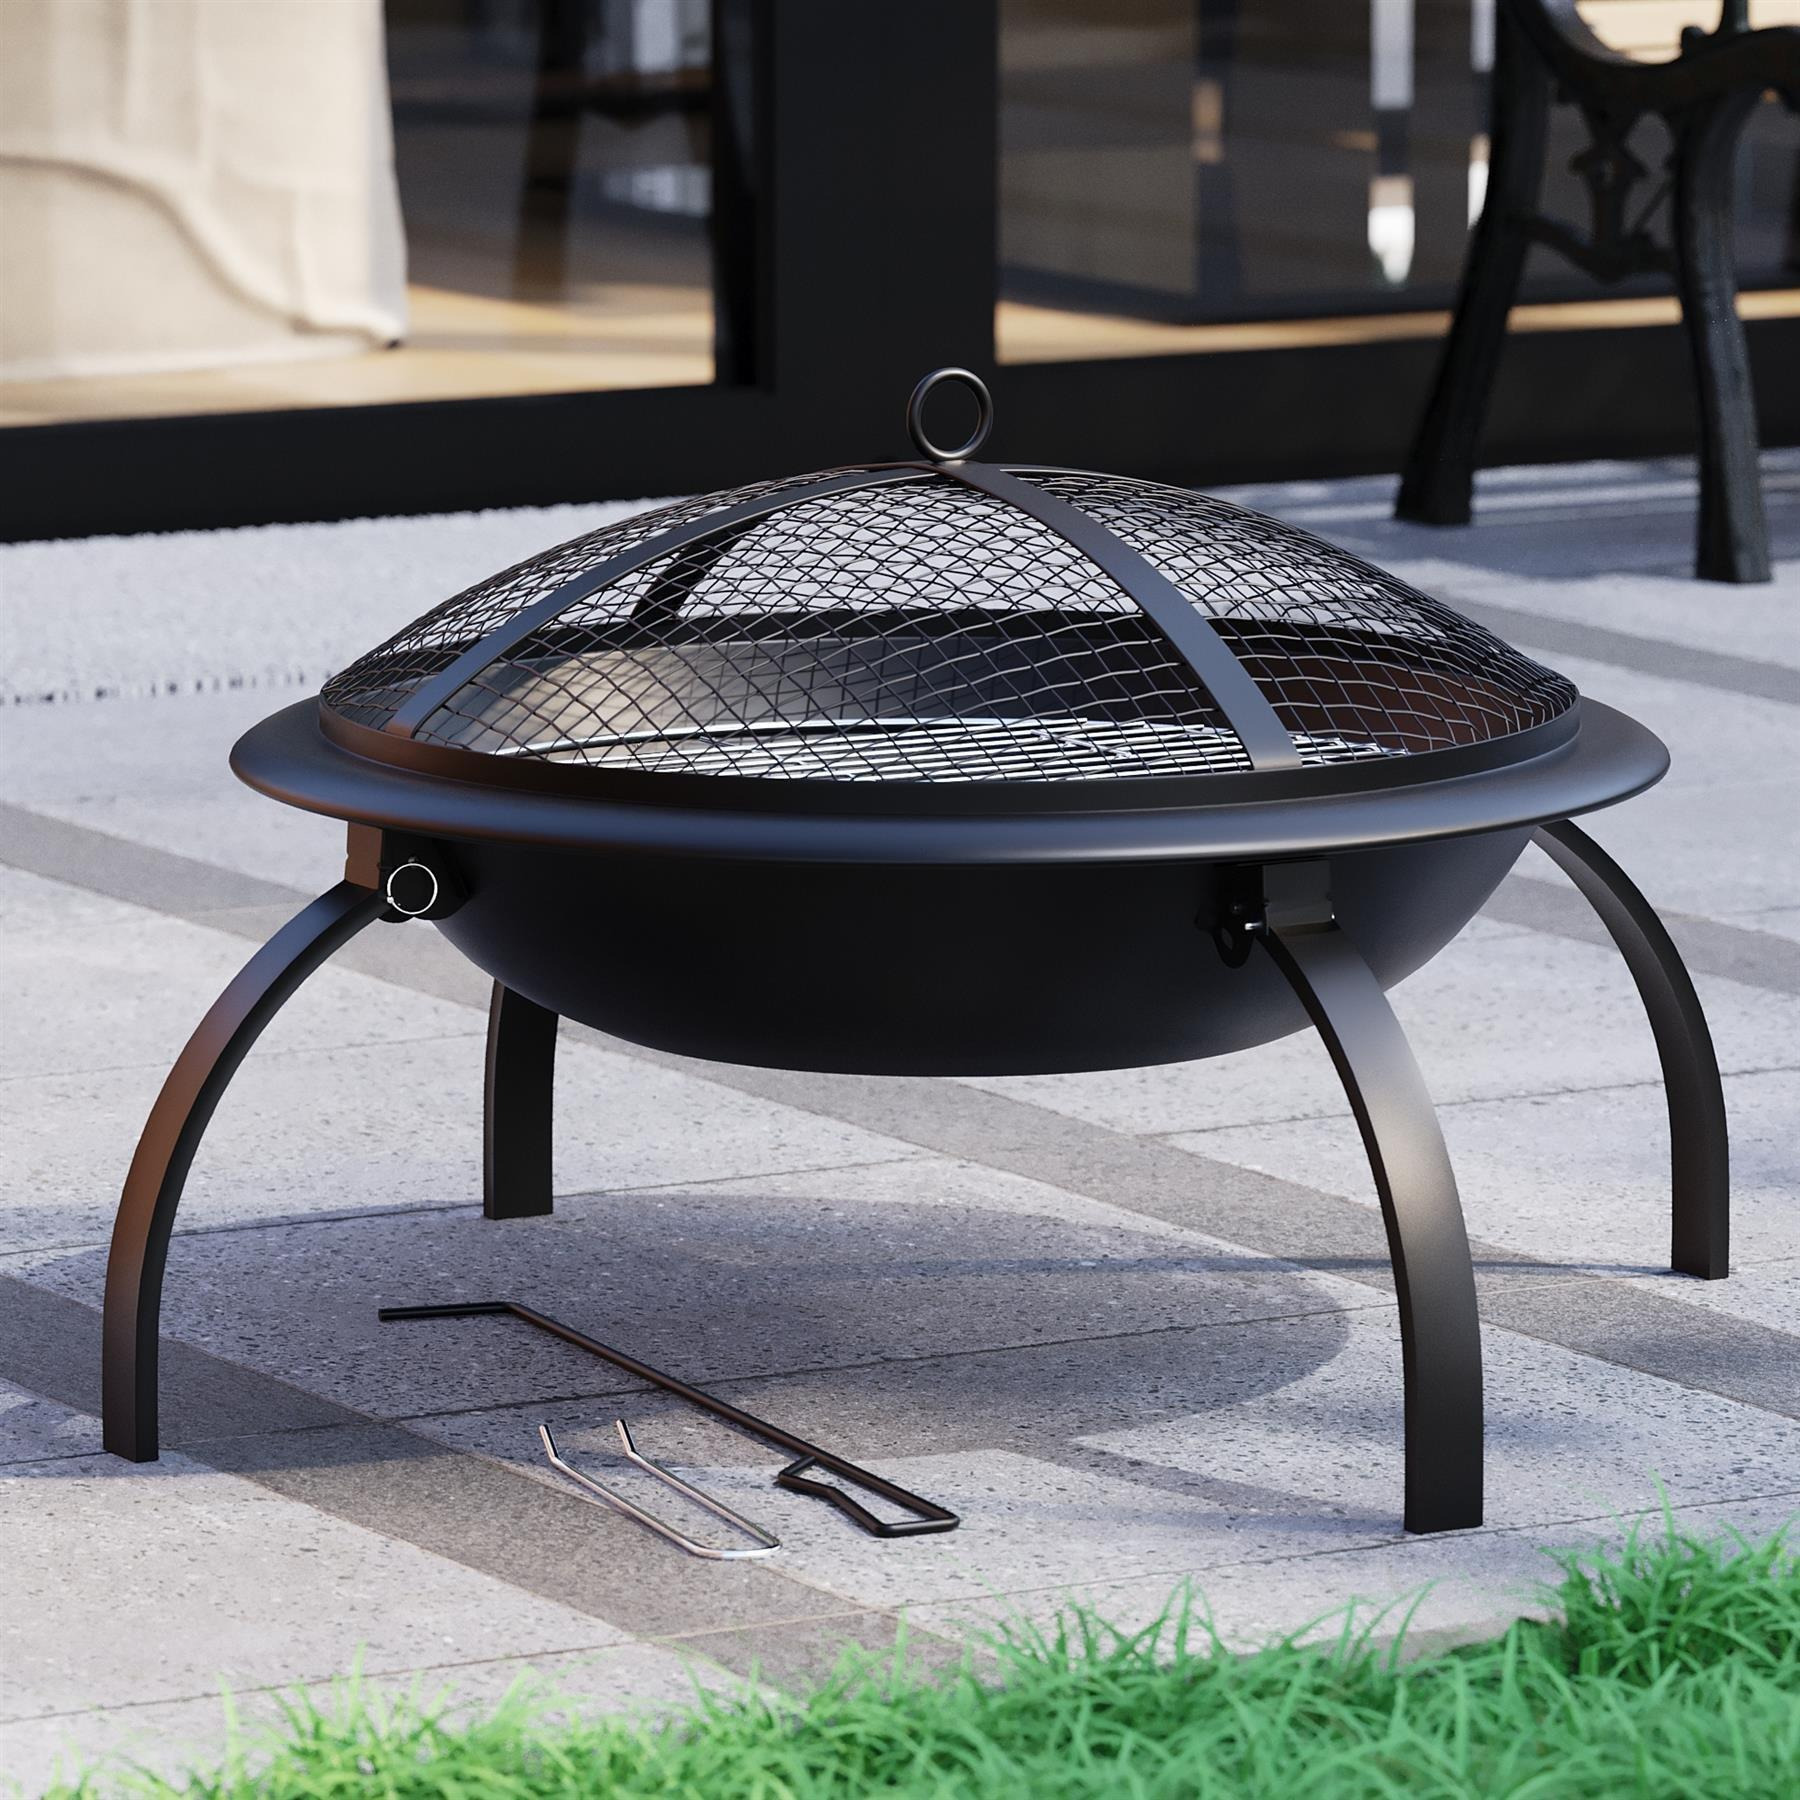 Fire Vida Folding Steel Fire Pit Black Large Fire Patio Cooking Grill - image 1